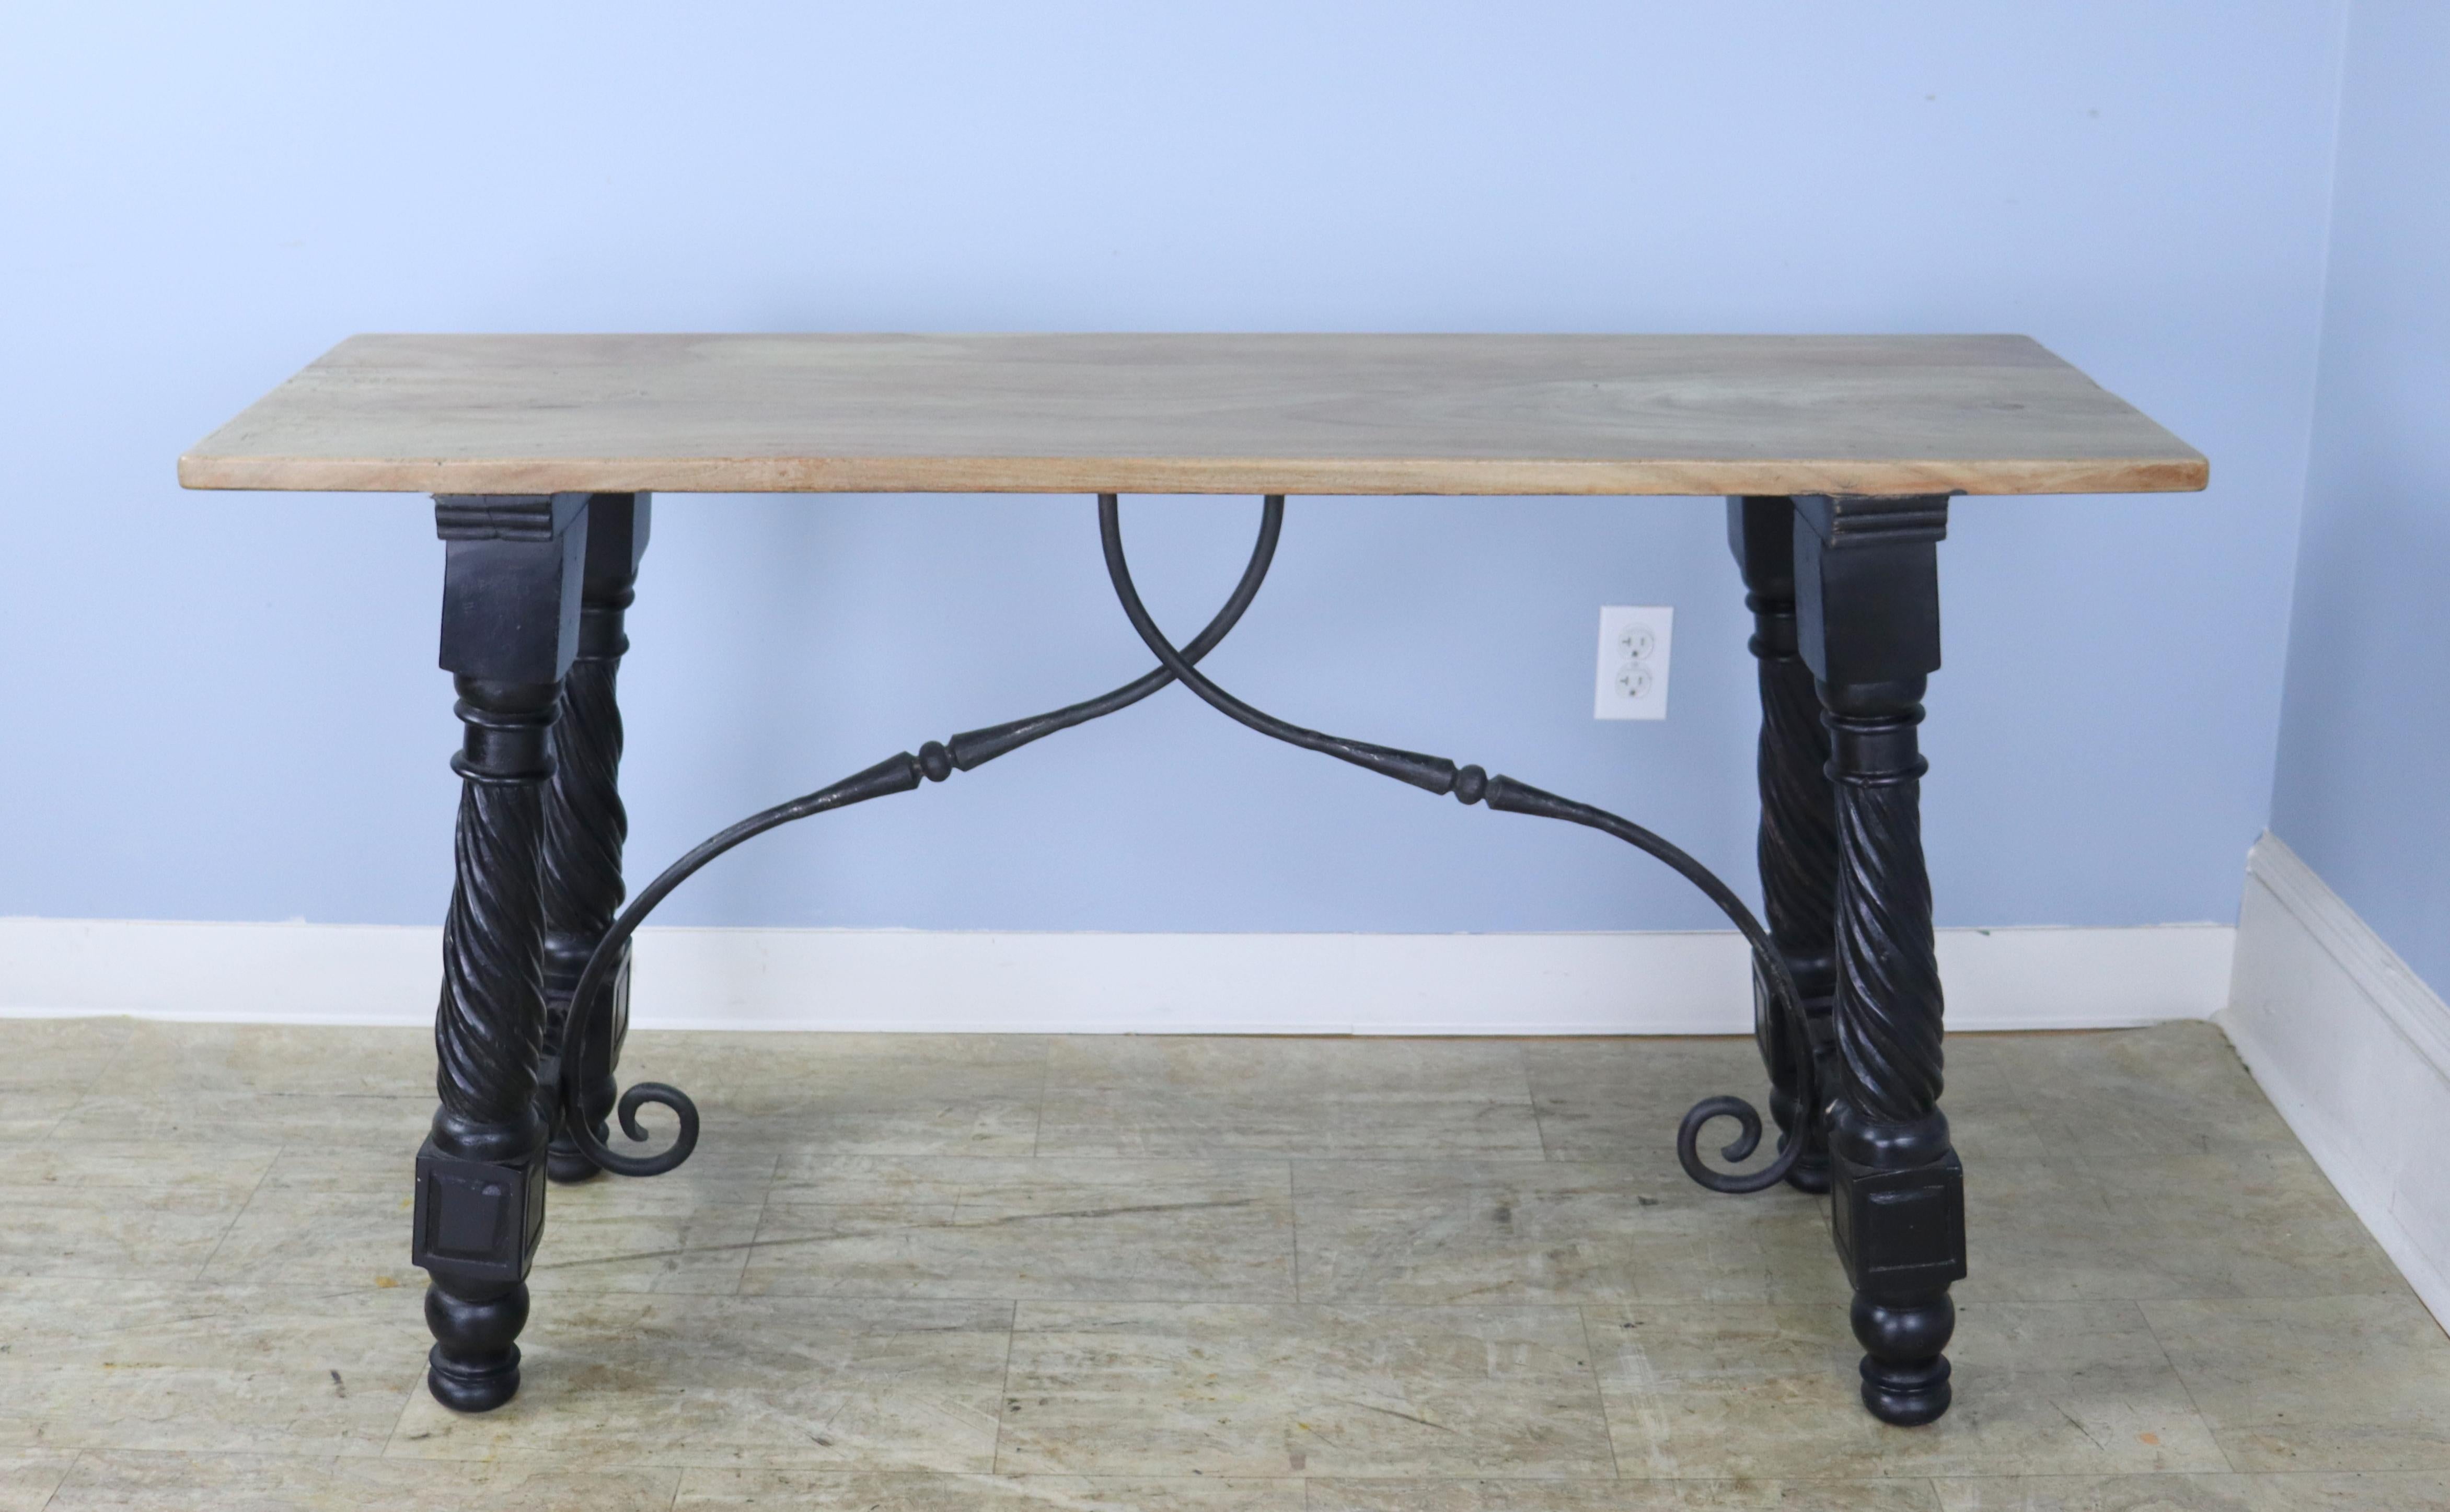 The oak top has been refinished on this interesting iron based table for a clean modern look. Great ebonized legs and curved iron supports. Good in the entryway or hall, or would be right as a sofa table.